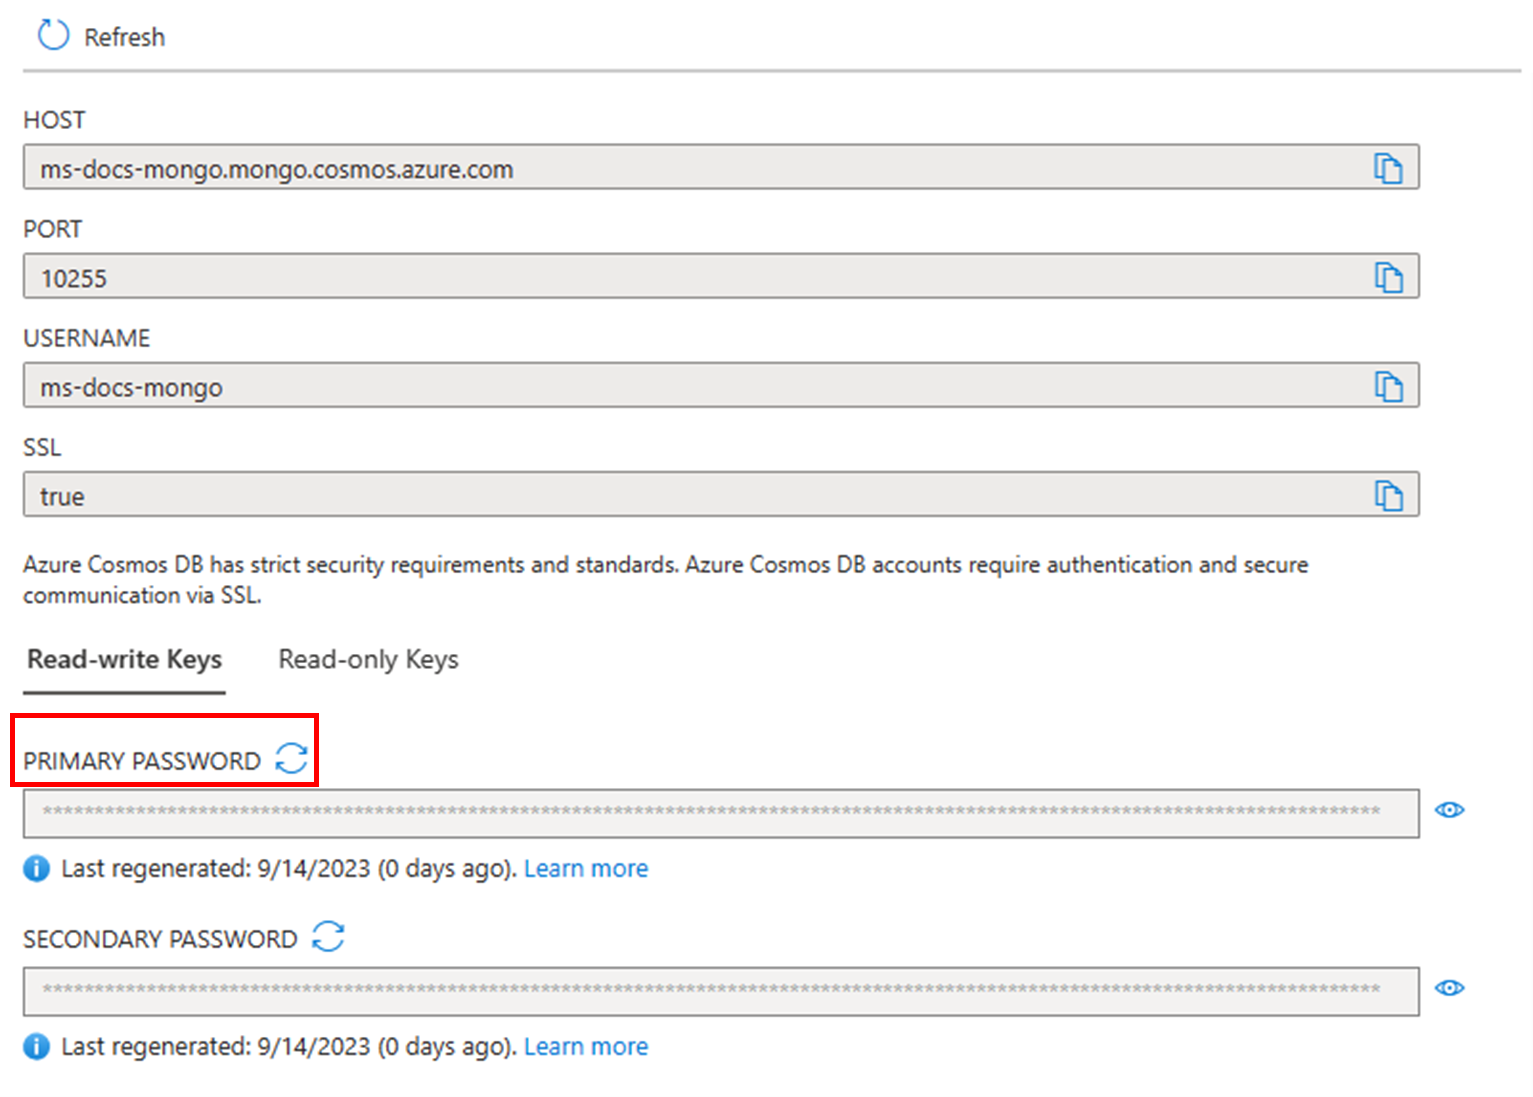 Screenshot showing how to regenerate the primary key in the Azure portal when used with MongoDB.